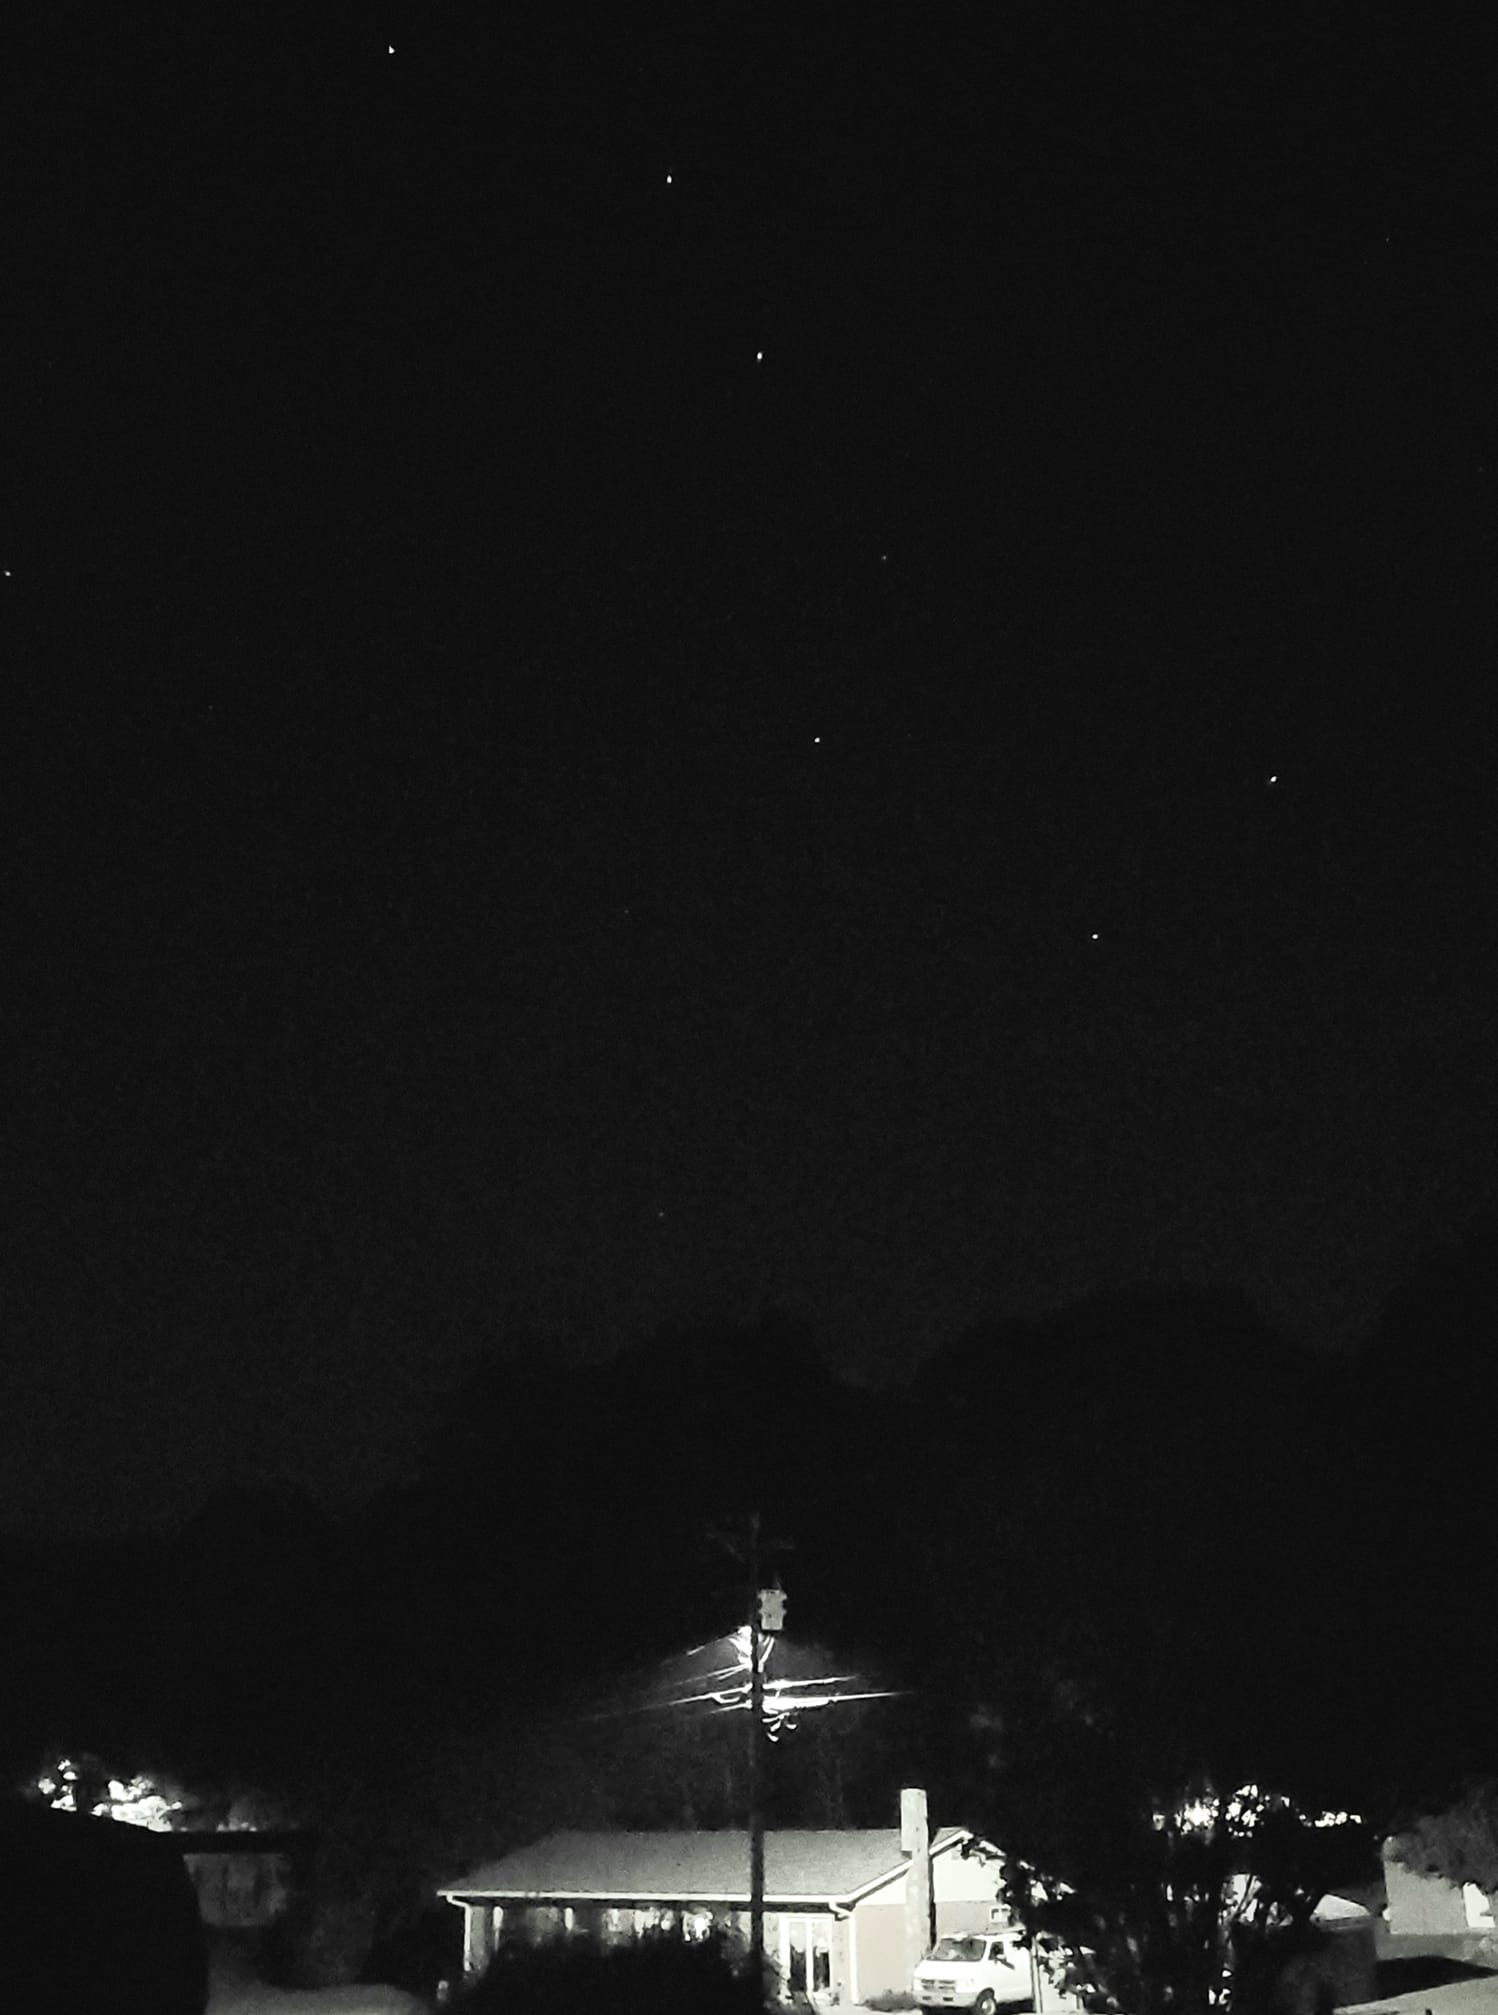 Big Dipper from my Observatory